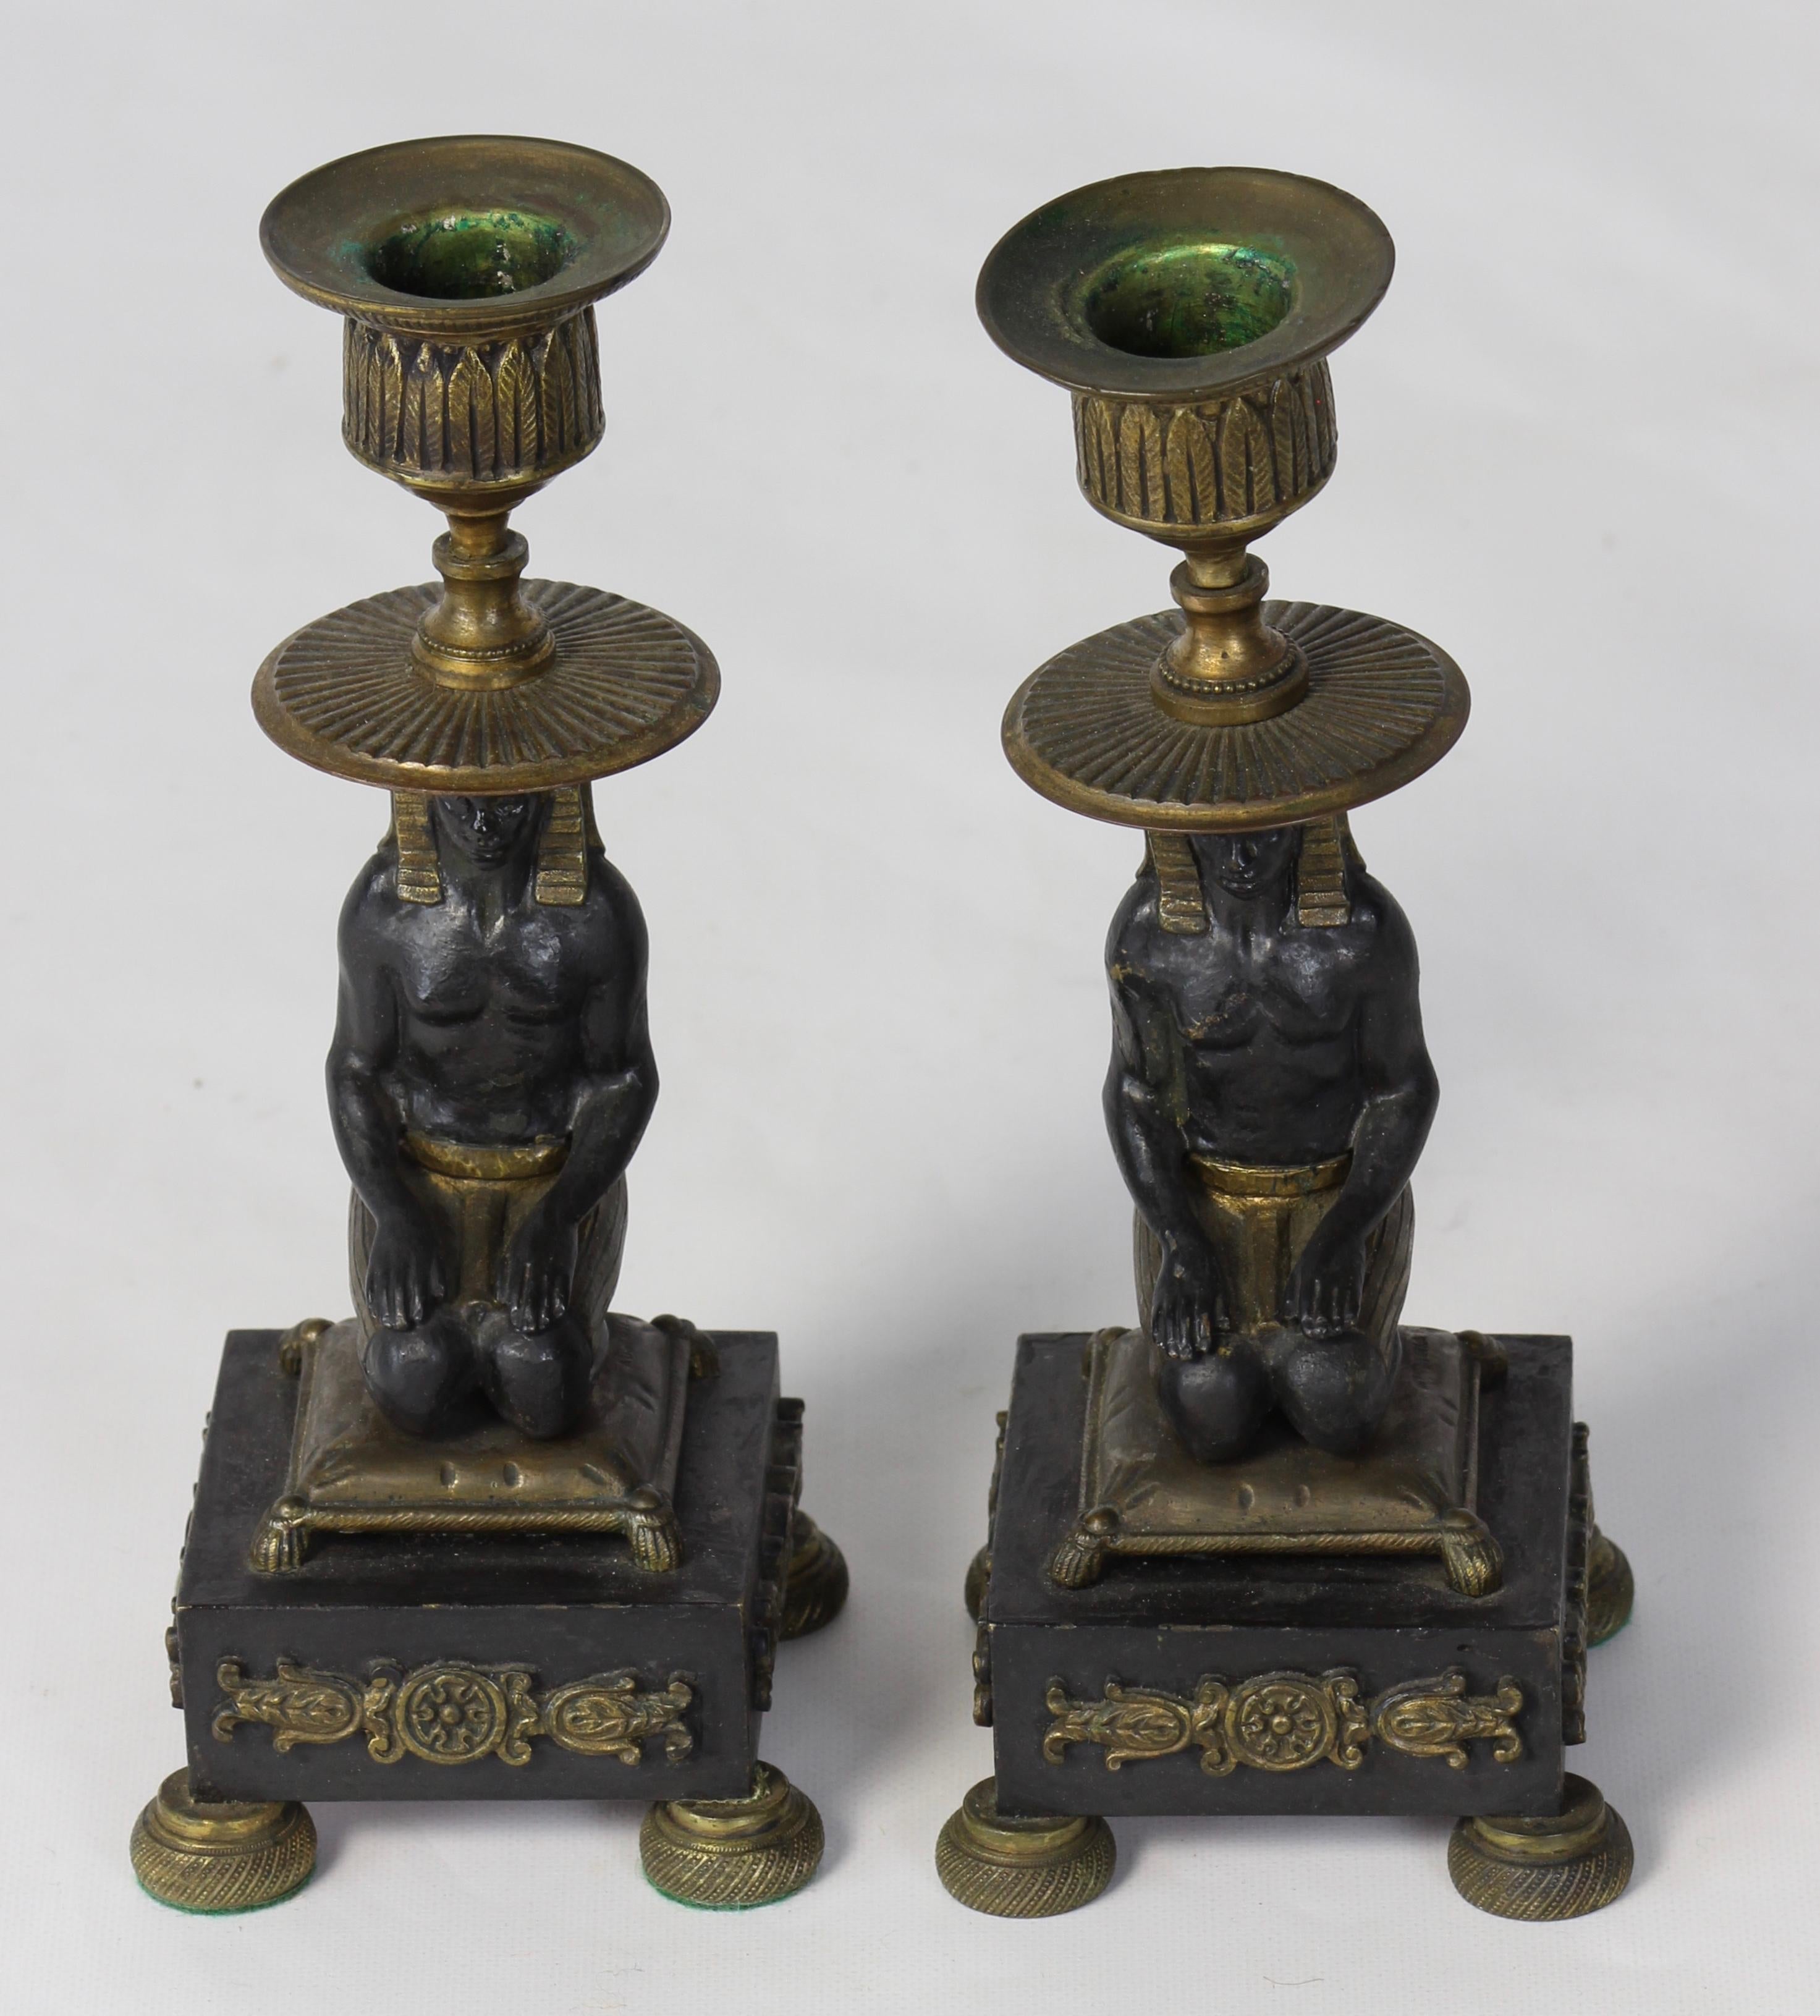 Pair of Early 19th Century Egyptian Revival Candlesticks 1